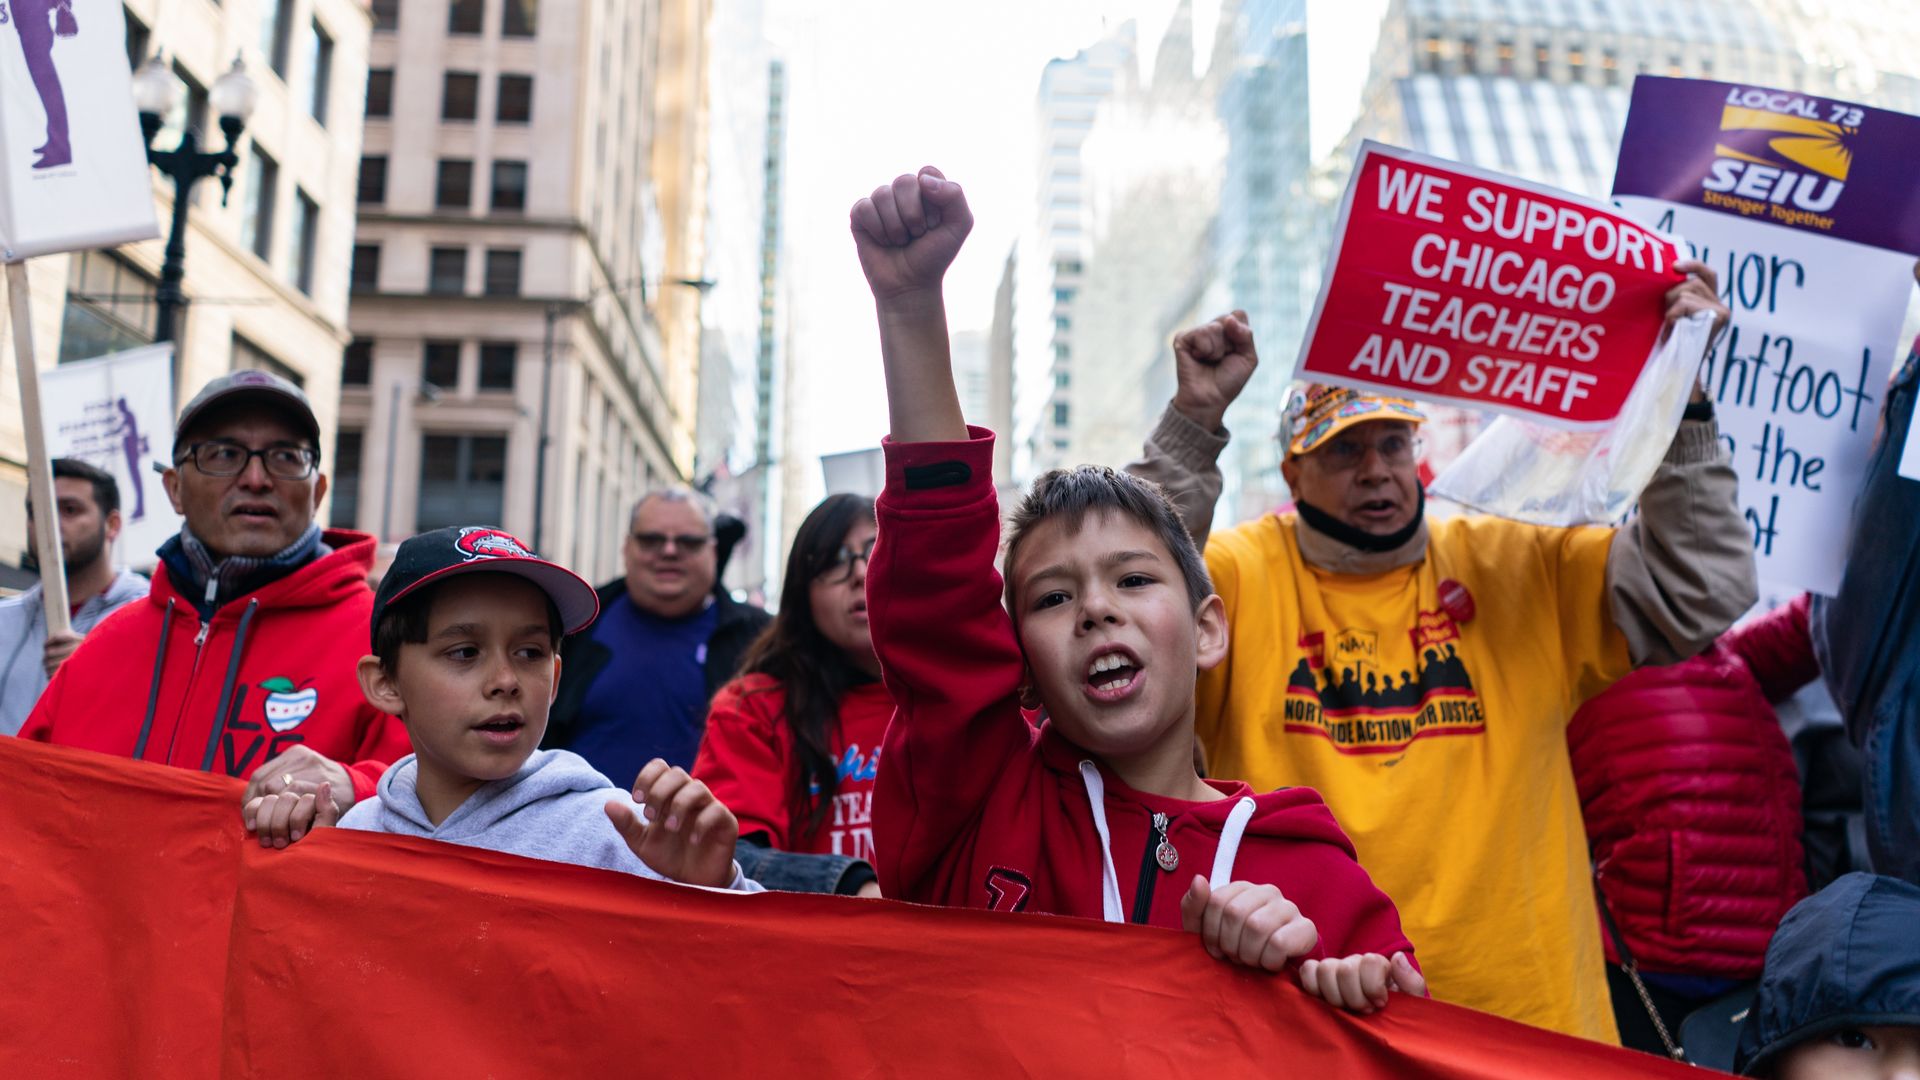 Protesters gather to support Chicago teachers